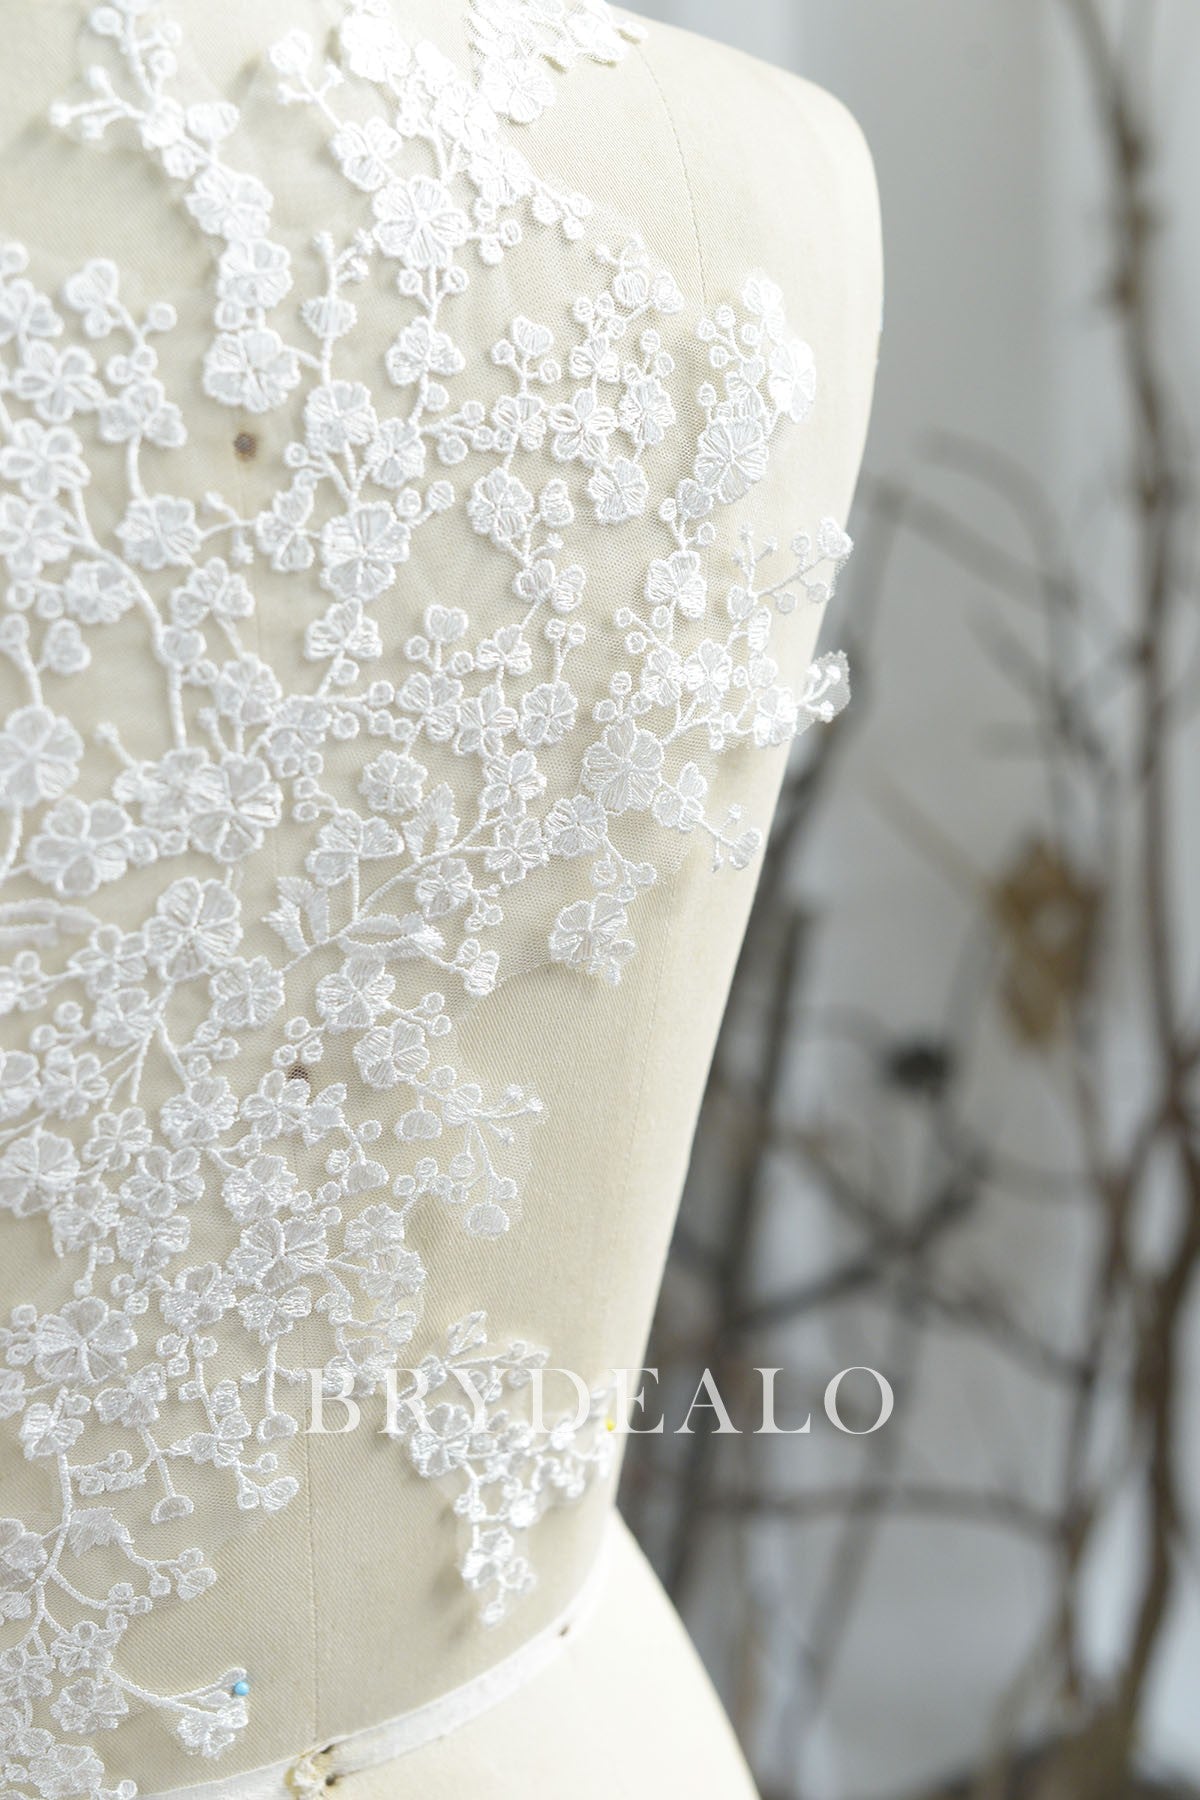 Embroidery Bridal Lace Appliques